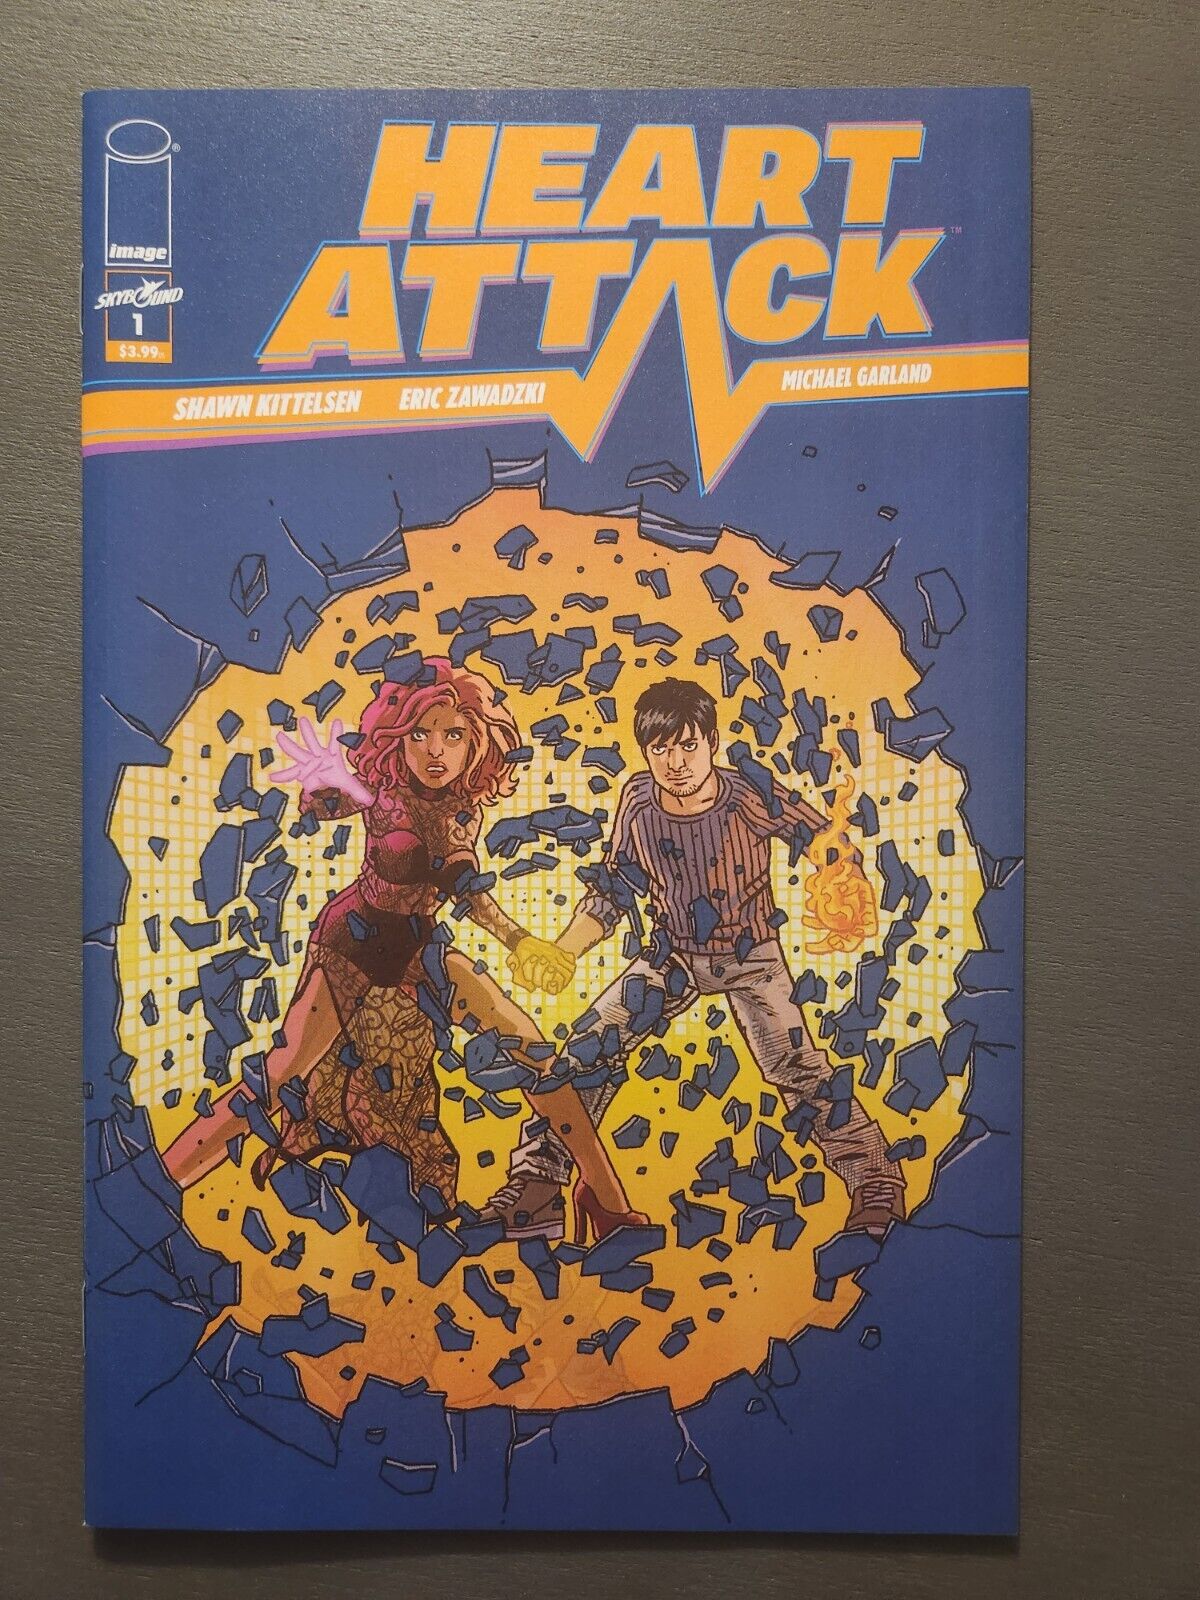 HEART ATTACK #1 (2019) Image Comics Optioned For TV Show